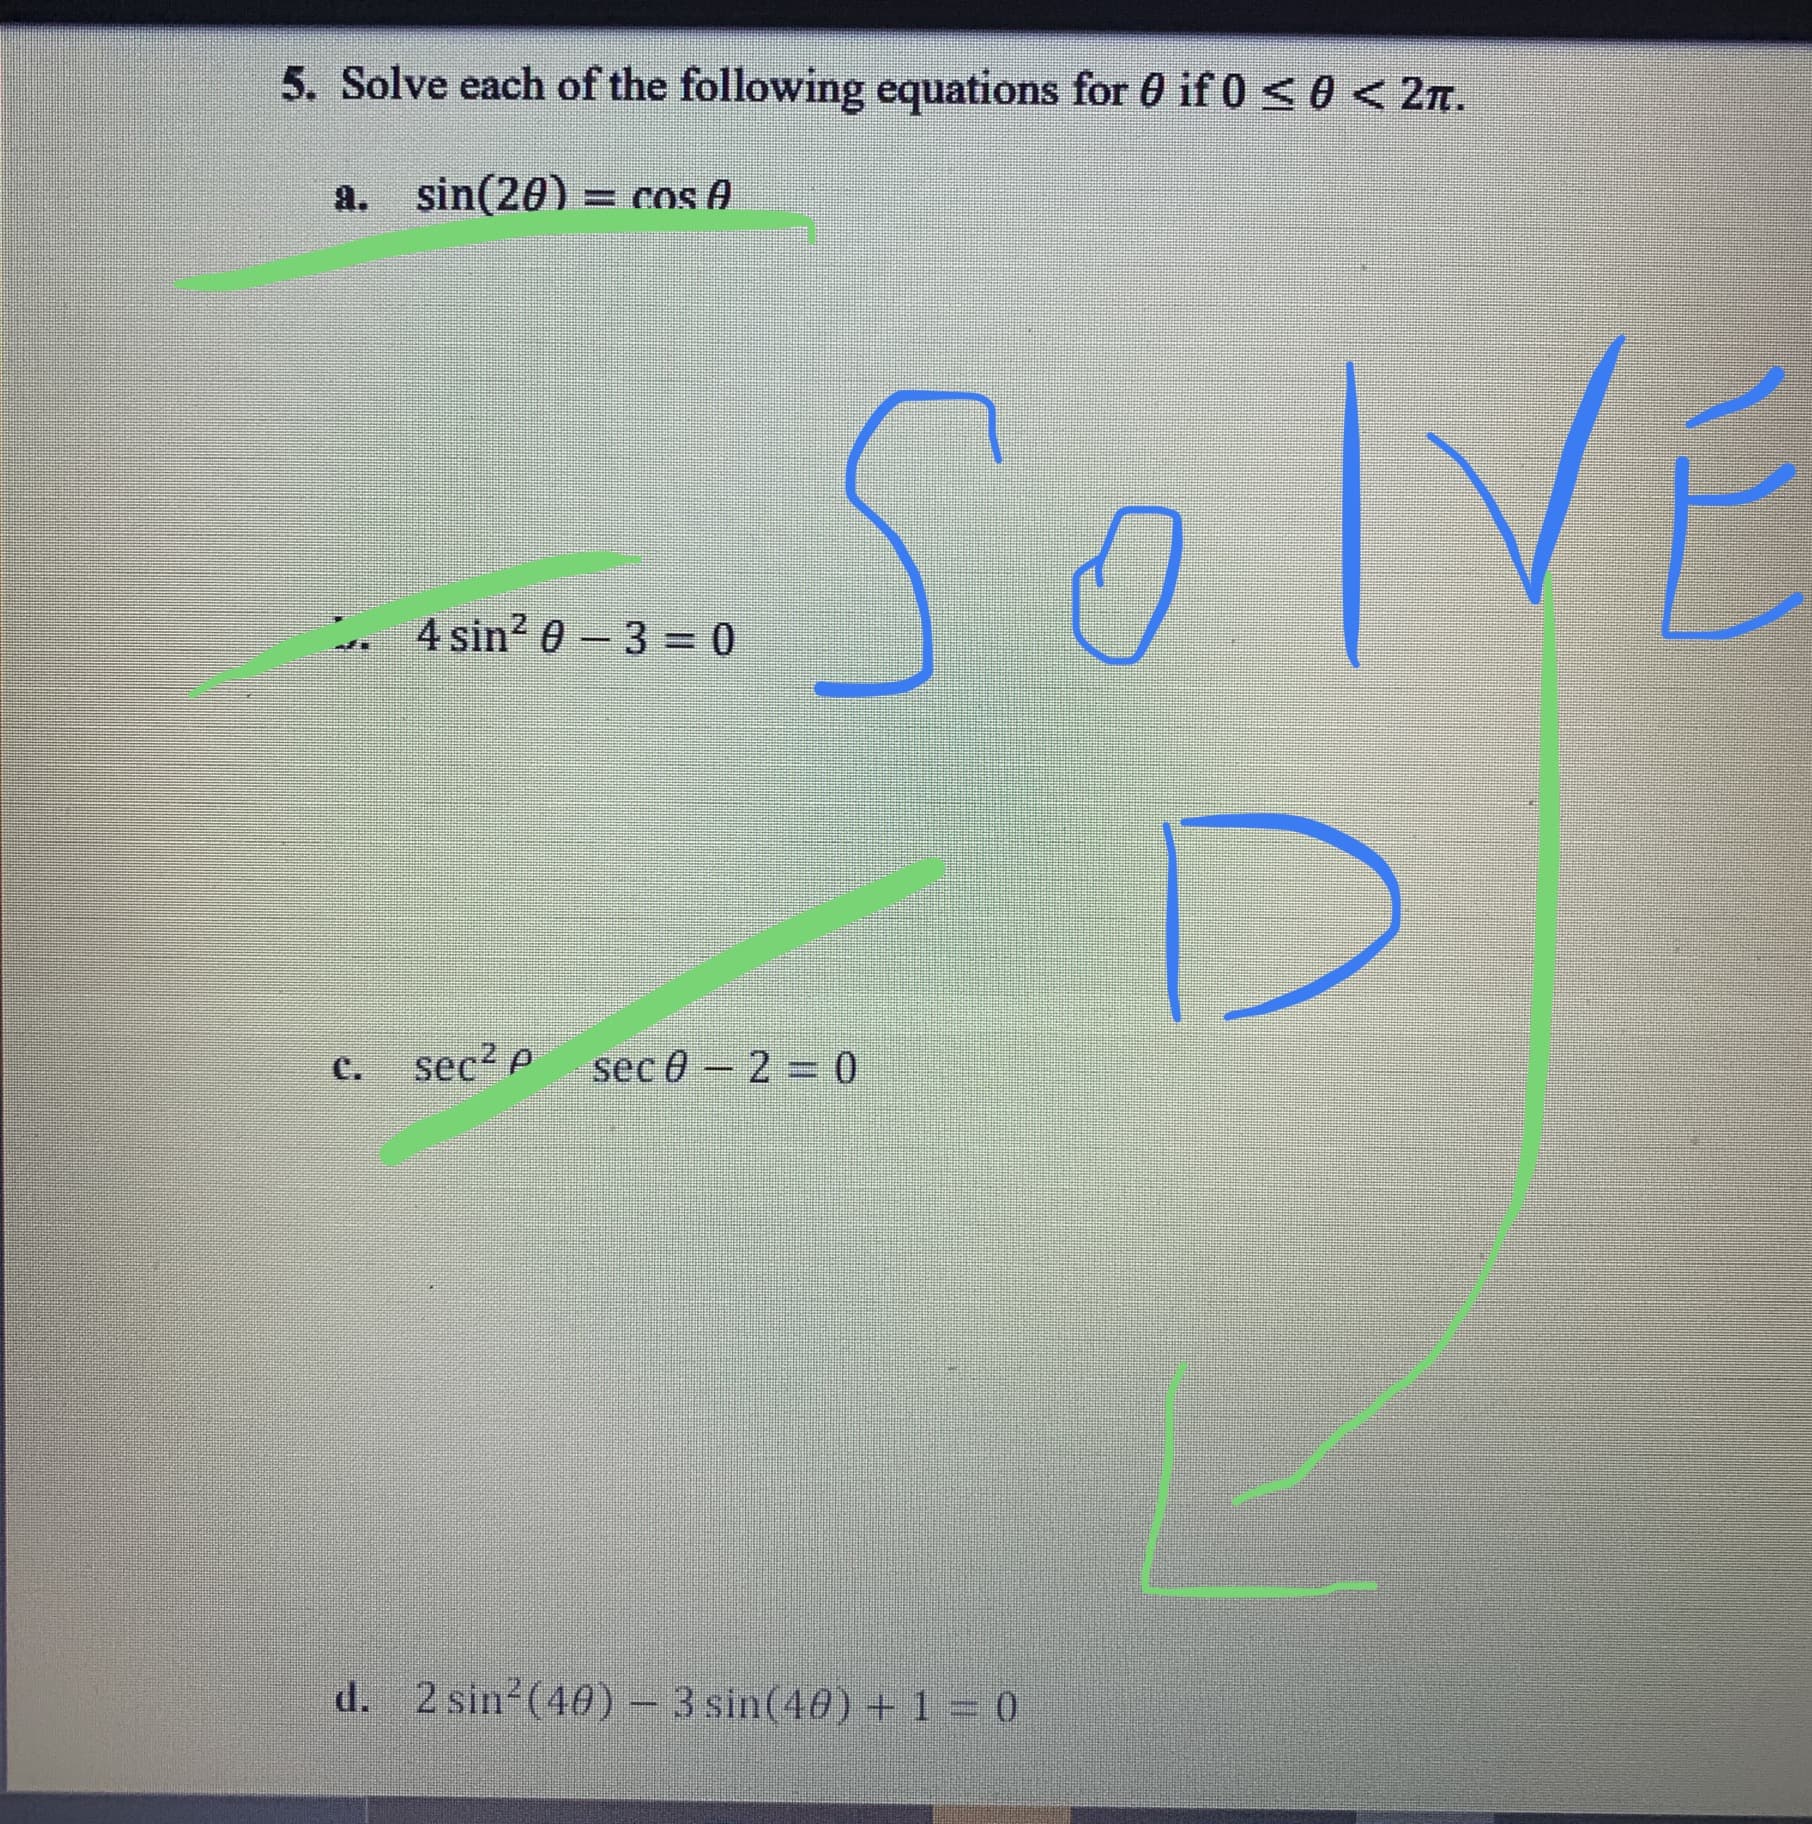 5. Solve each of the following equations for 0 if 0 < 0 < 2m.
a. sin(20)
SolVE
. 4 sin? 0 -33D0
sec? p
sec 0-2 0
C.
d. 2 sin2(40)- 3 sin(40) + 1 = 0
